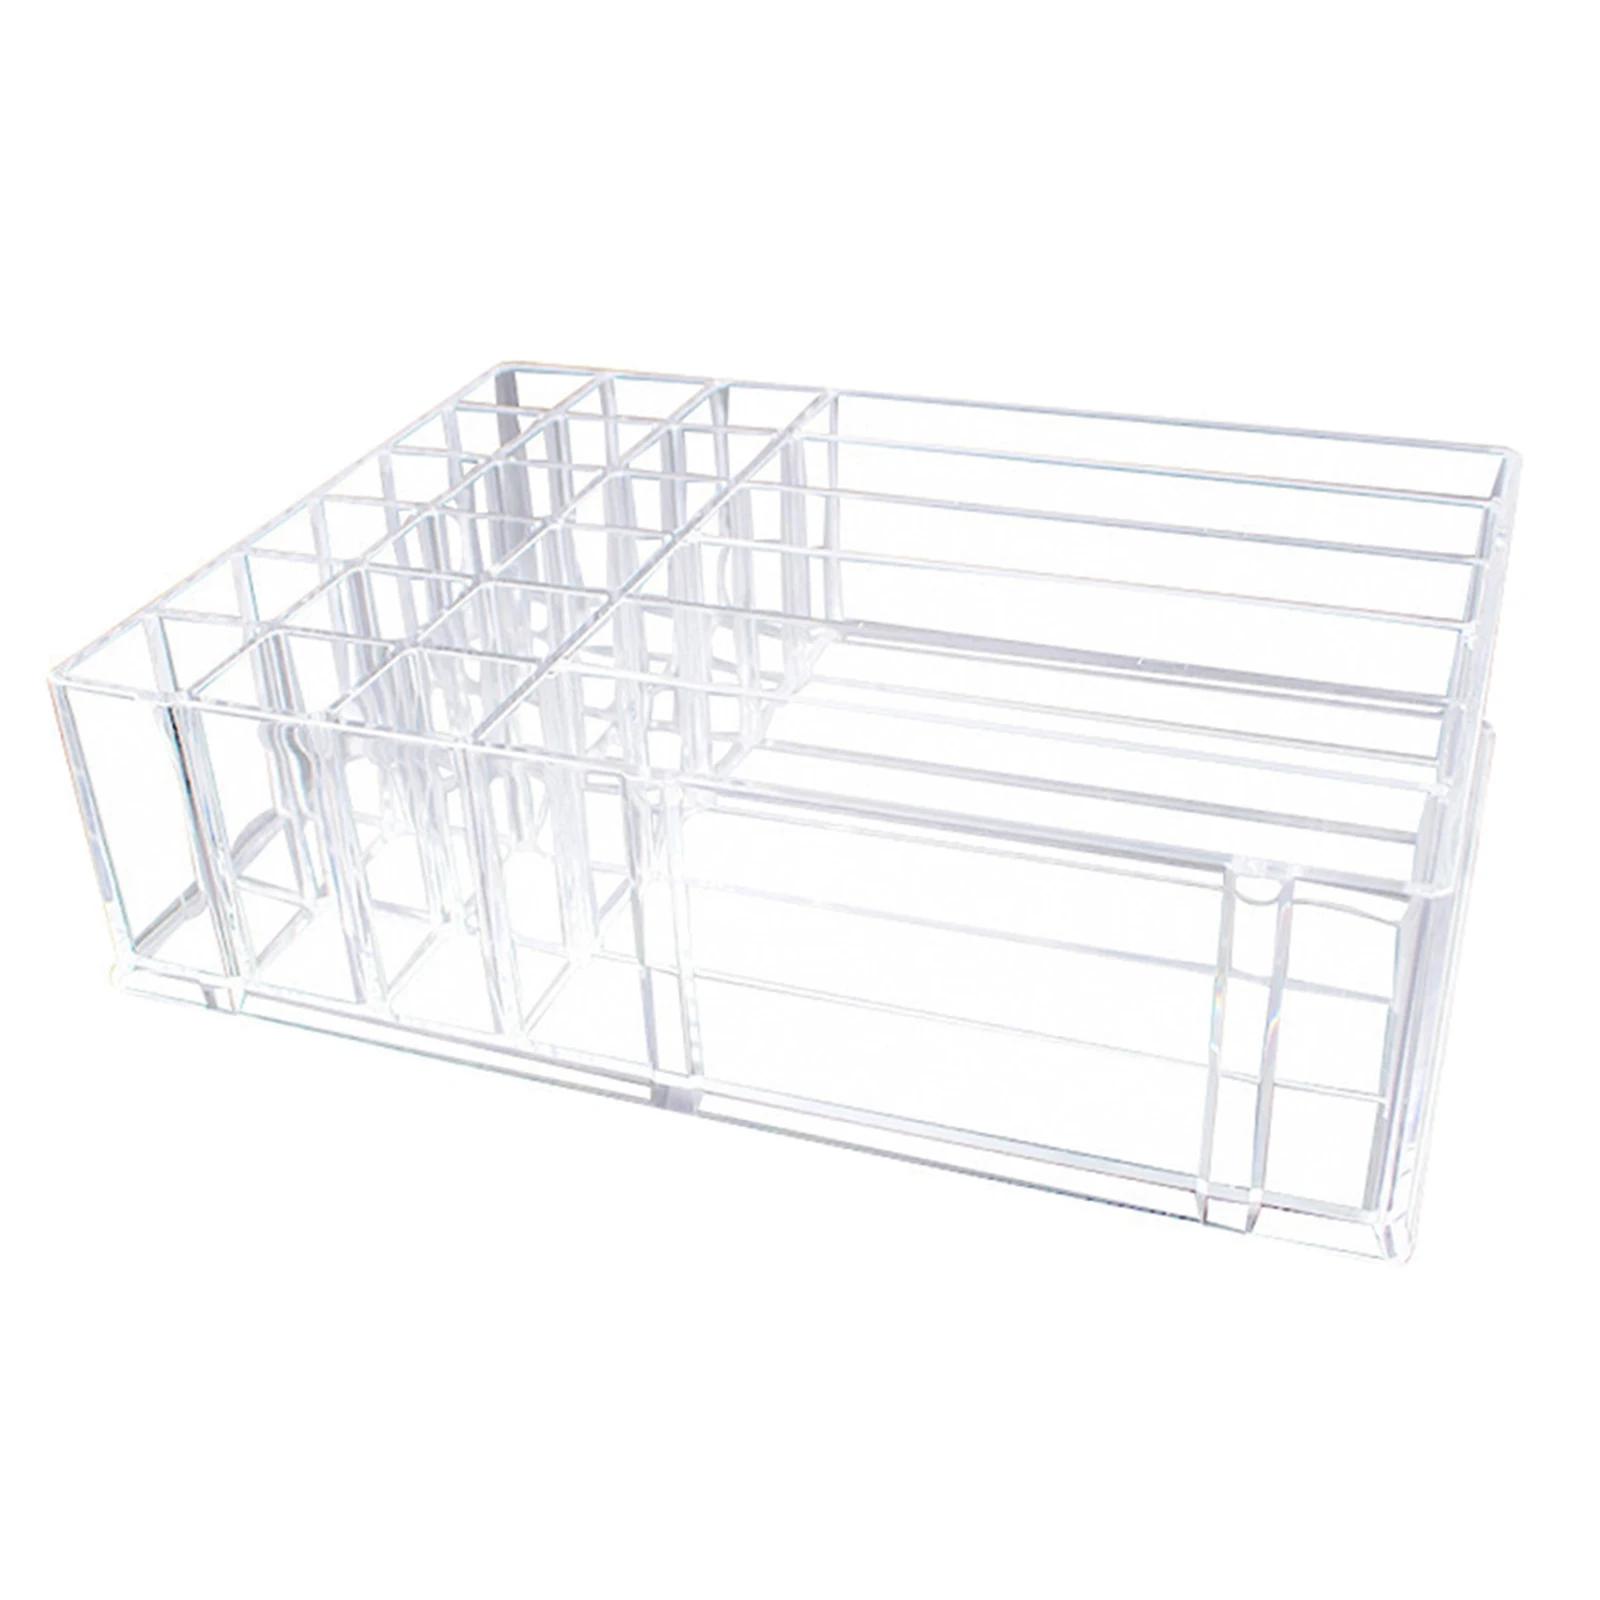  Organizers and Transparent Acrylic Make Organizer Holder with Detachable Drawer Divider